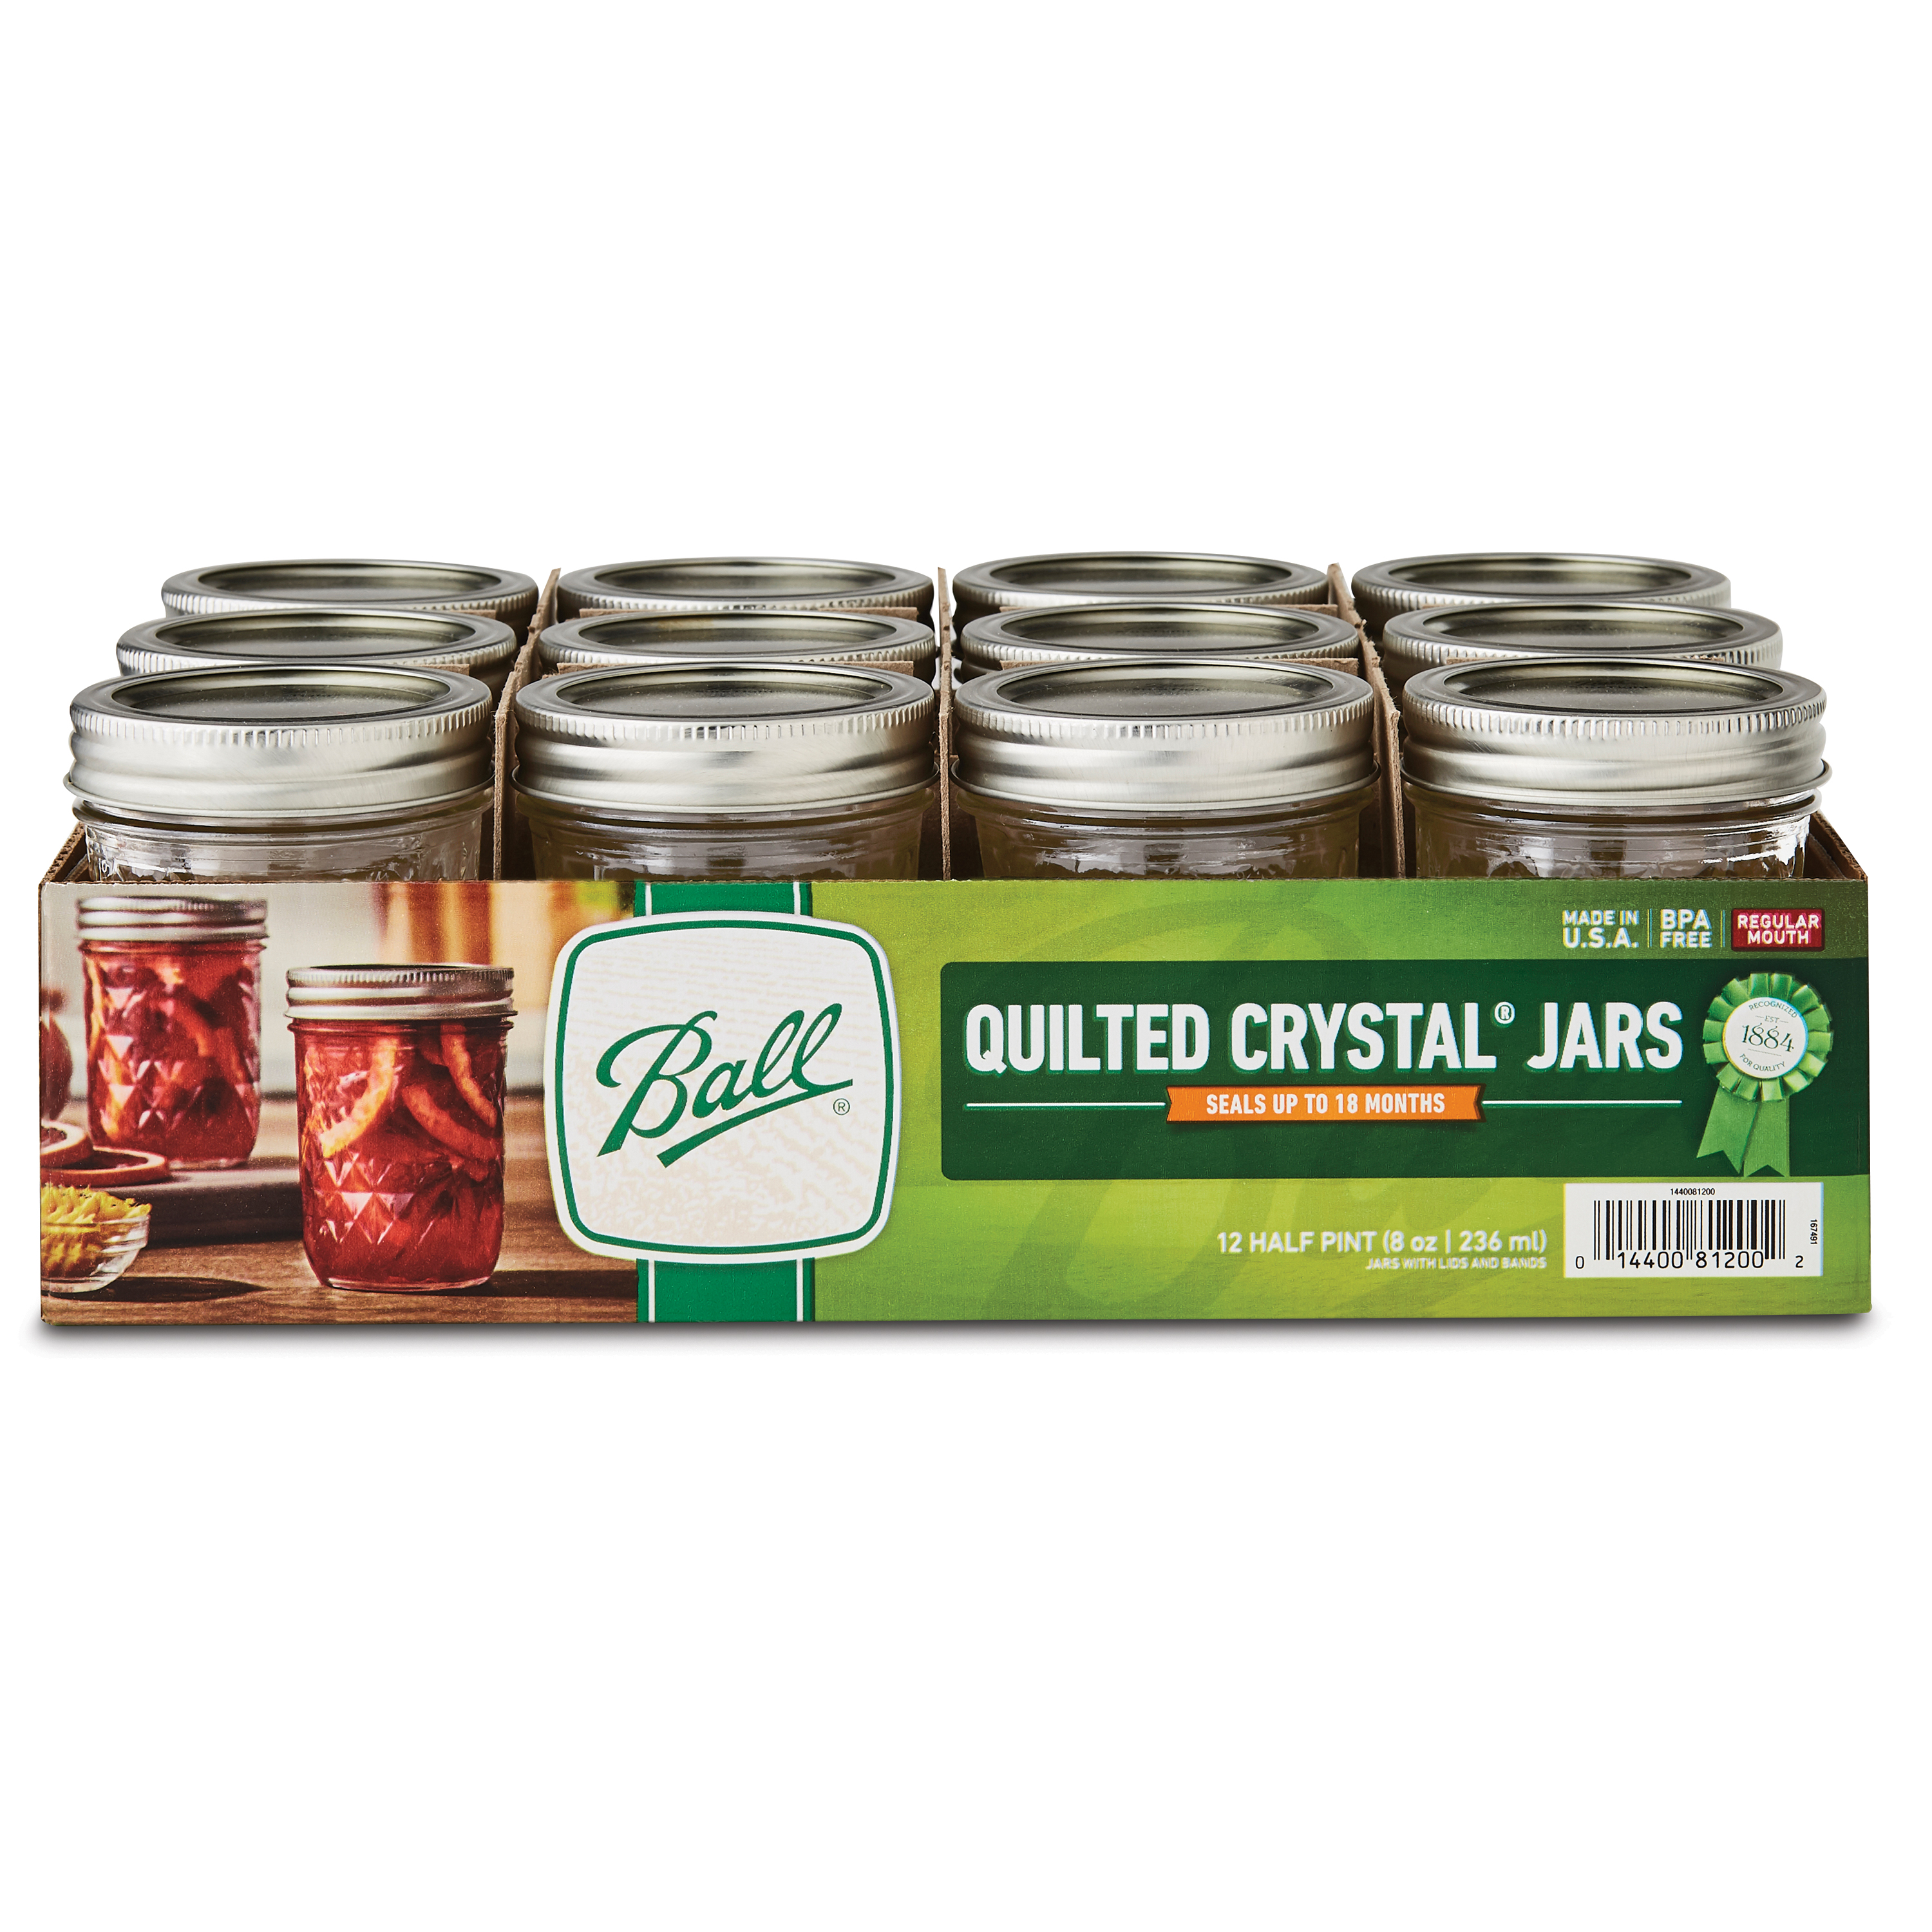 Ball Quilted Crystal Mason Jar w/ Lid & Band, Regular Mouth, 8 Ounces, 12 Count, 4 Lb. - image 3 of 8